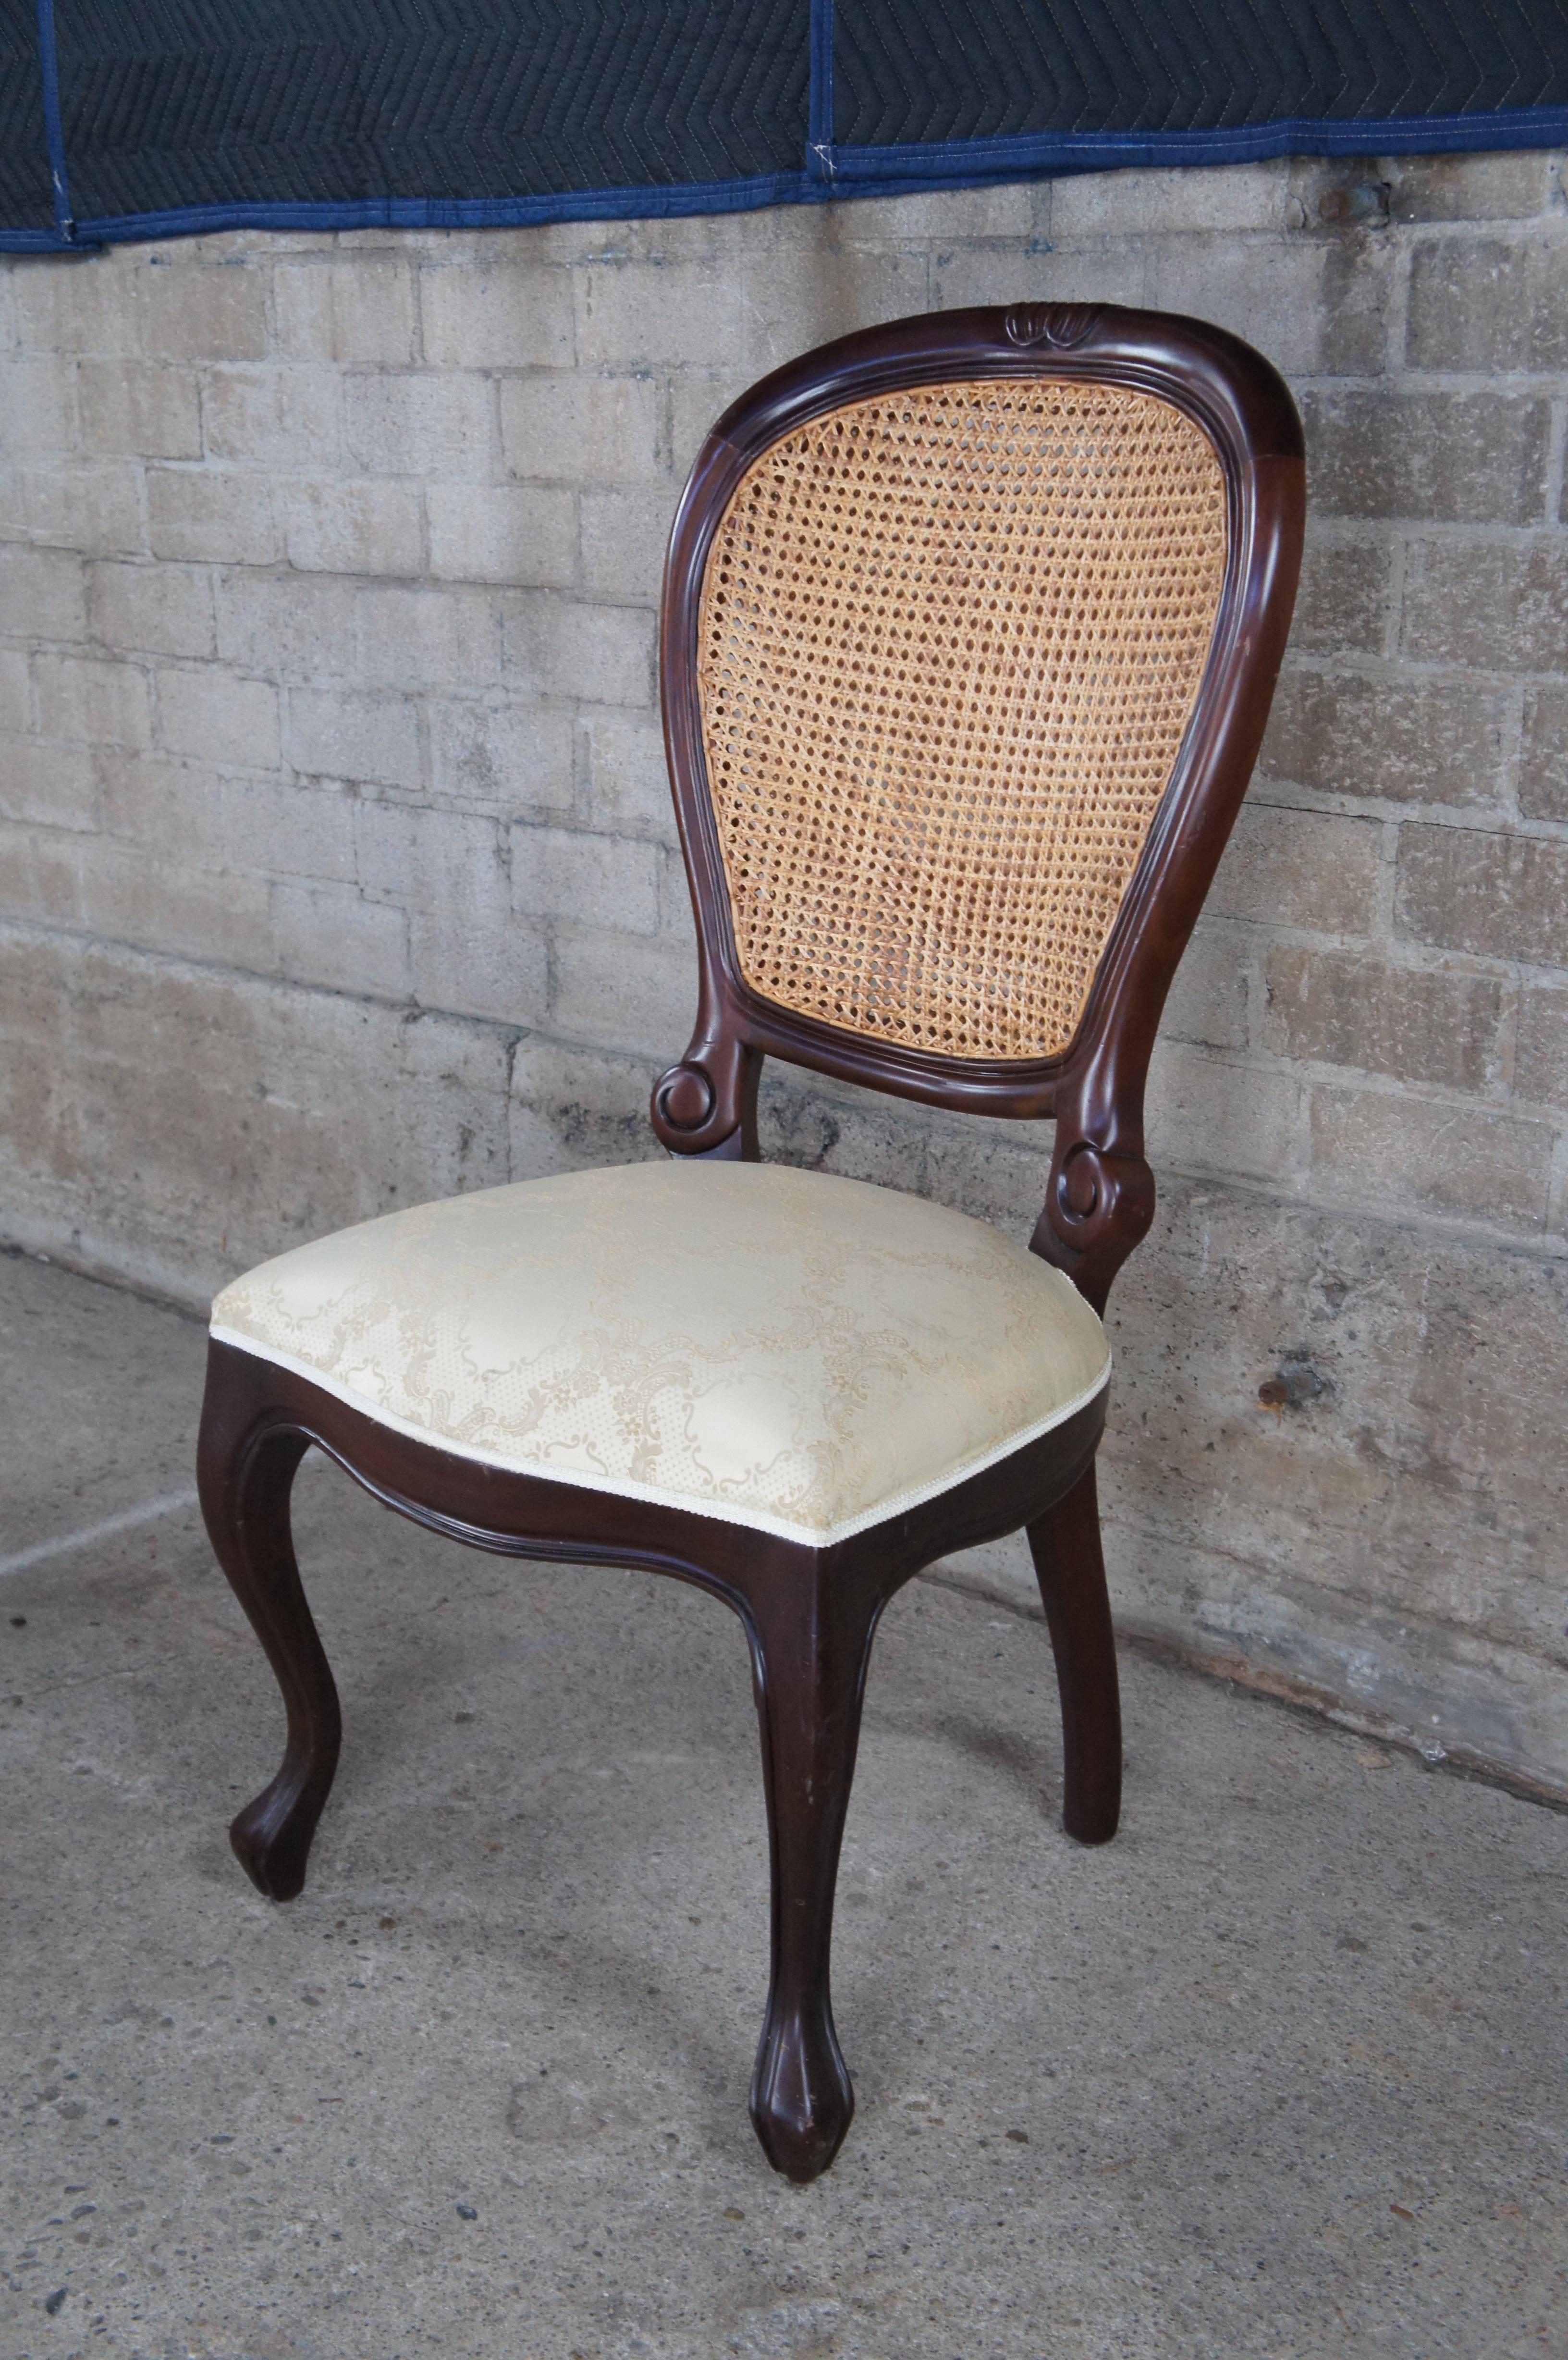 20th Century 3 Victorian Revival Mahogany Balloon Back Caned Dining Chairs Silk Brocade Seats For Sale